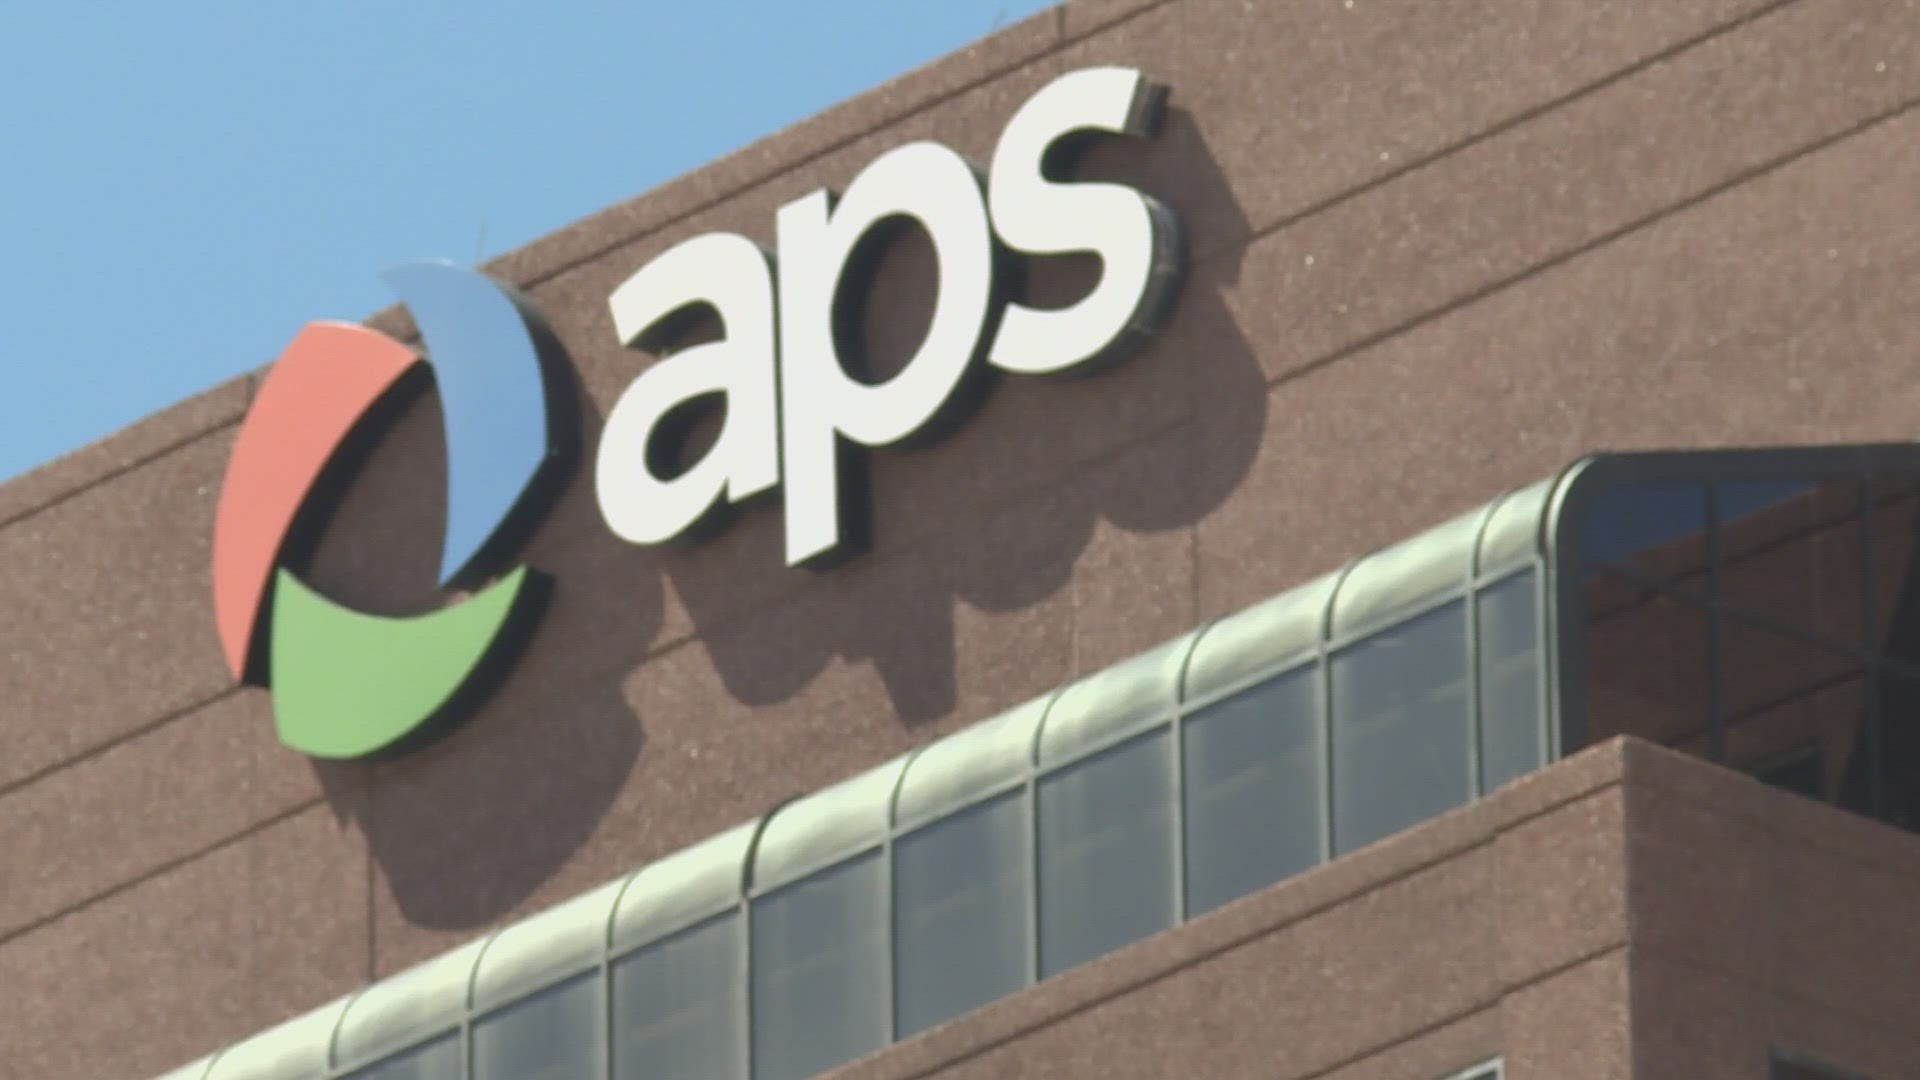 A consumer advocate says the rate proposal would mean a 15.5% increase to the average home electricity bill from APS.